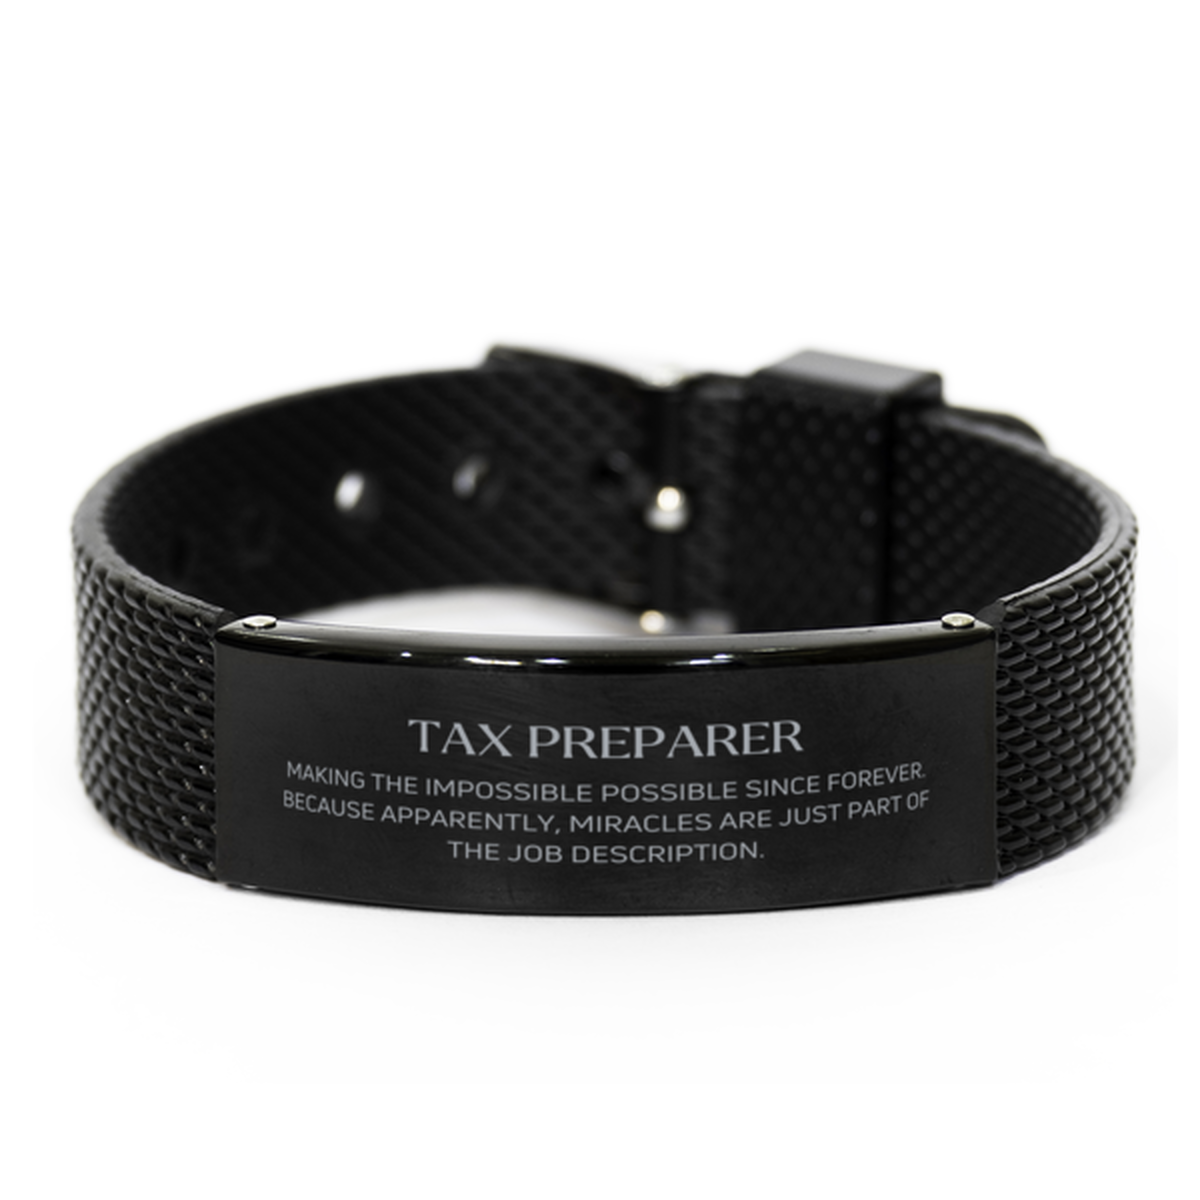 Funny Tax Preparer Gifts, Miracles are just part of the job description, Inspirational Birthday Black Shark Mesh Bracelet For Tax Preparer, Men, Women, Coworkers, Friends, Boss